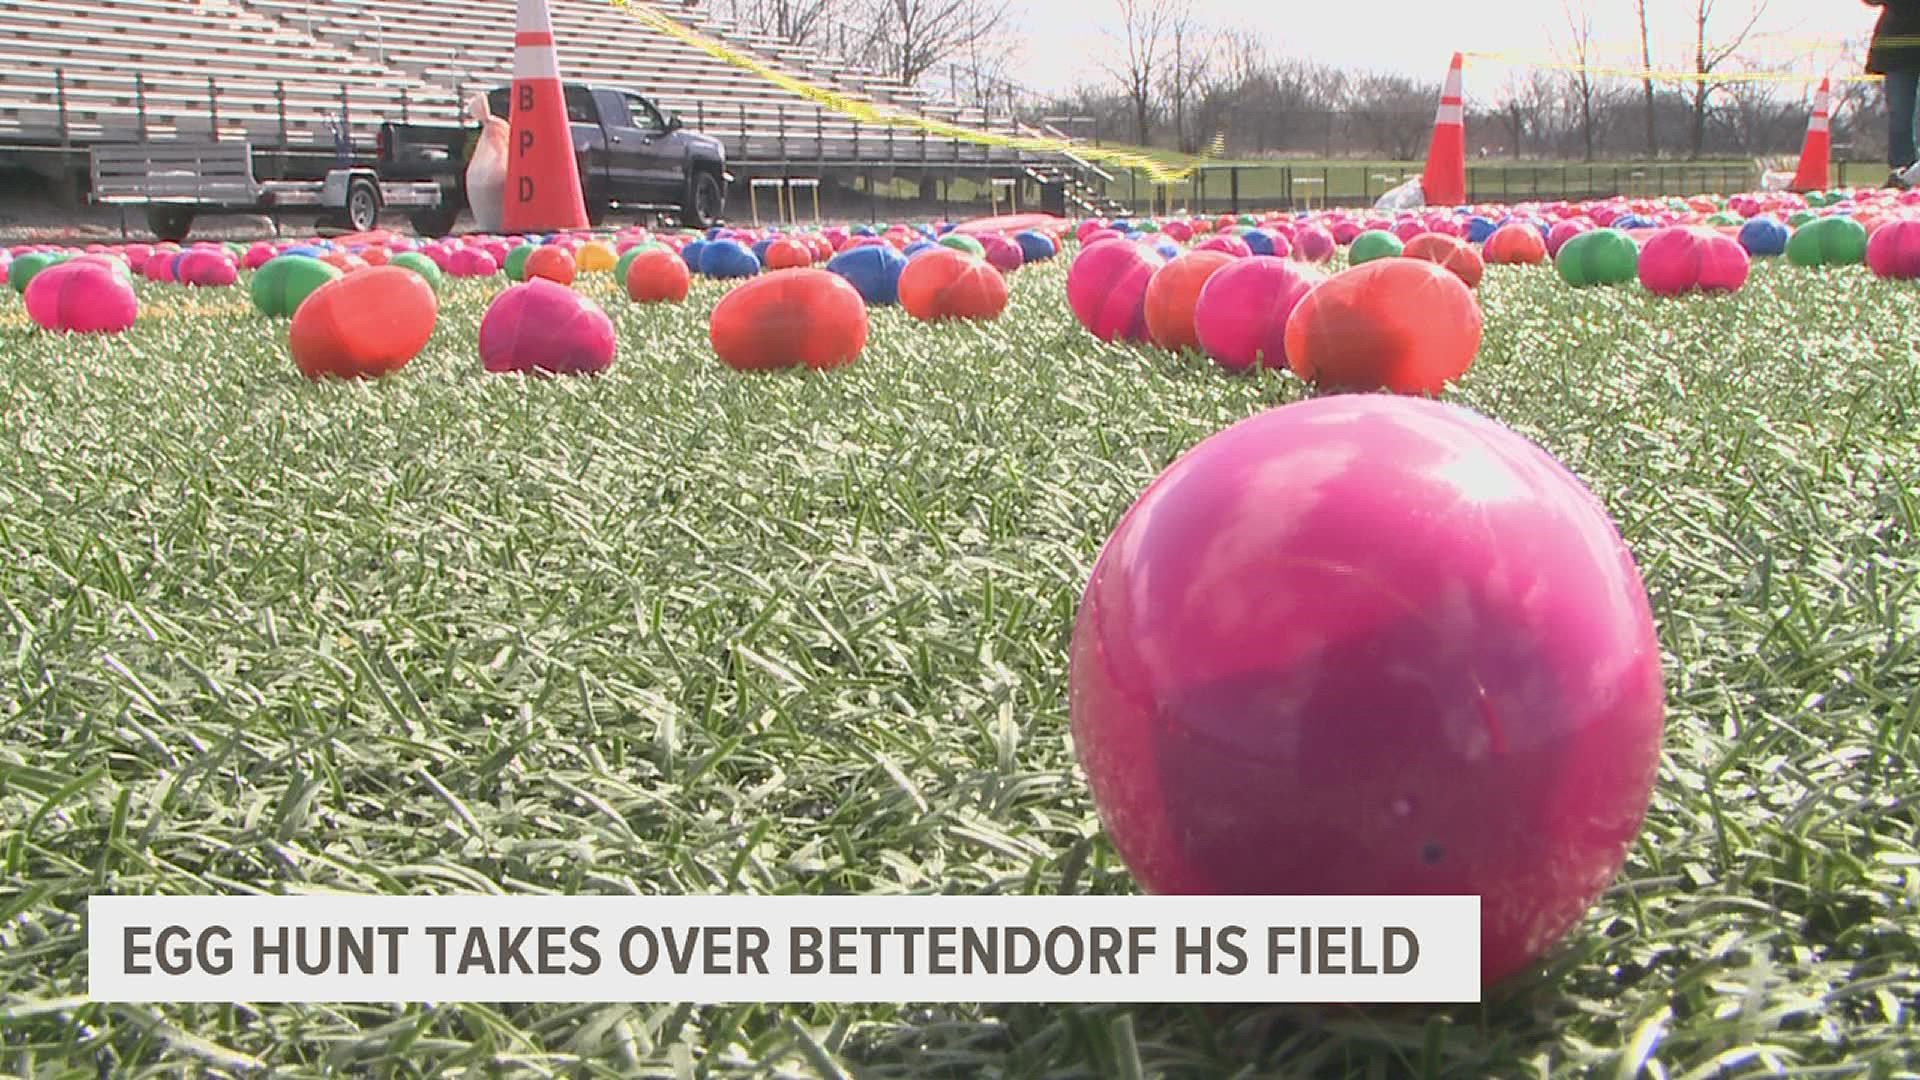 Kids took to the Bettendorf High School football field to collect over 15,000 eggs carrying candy and gift cards.